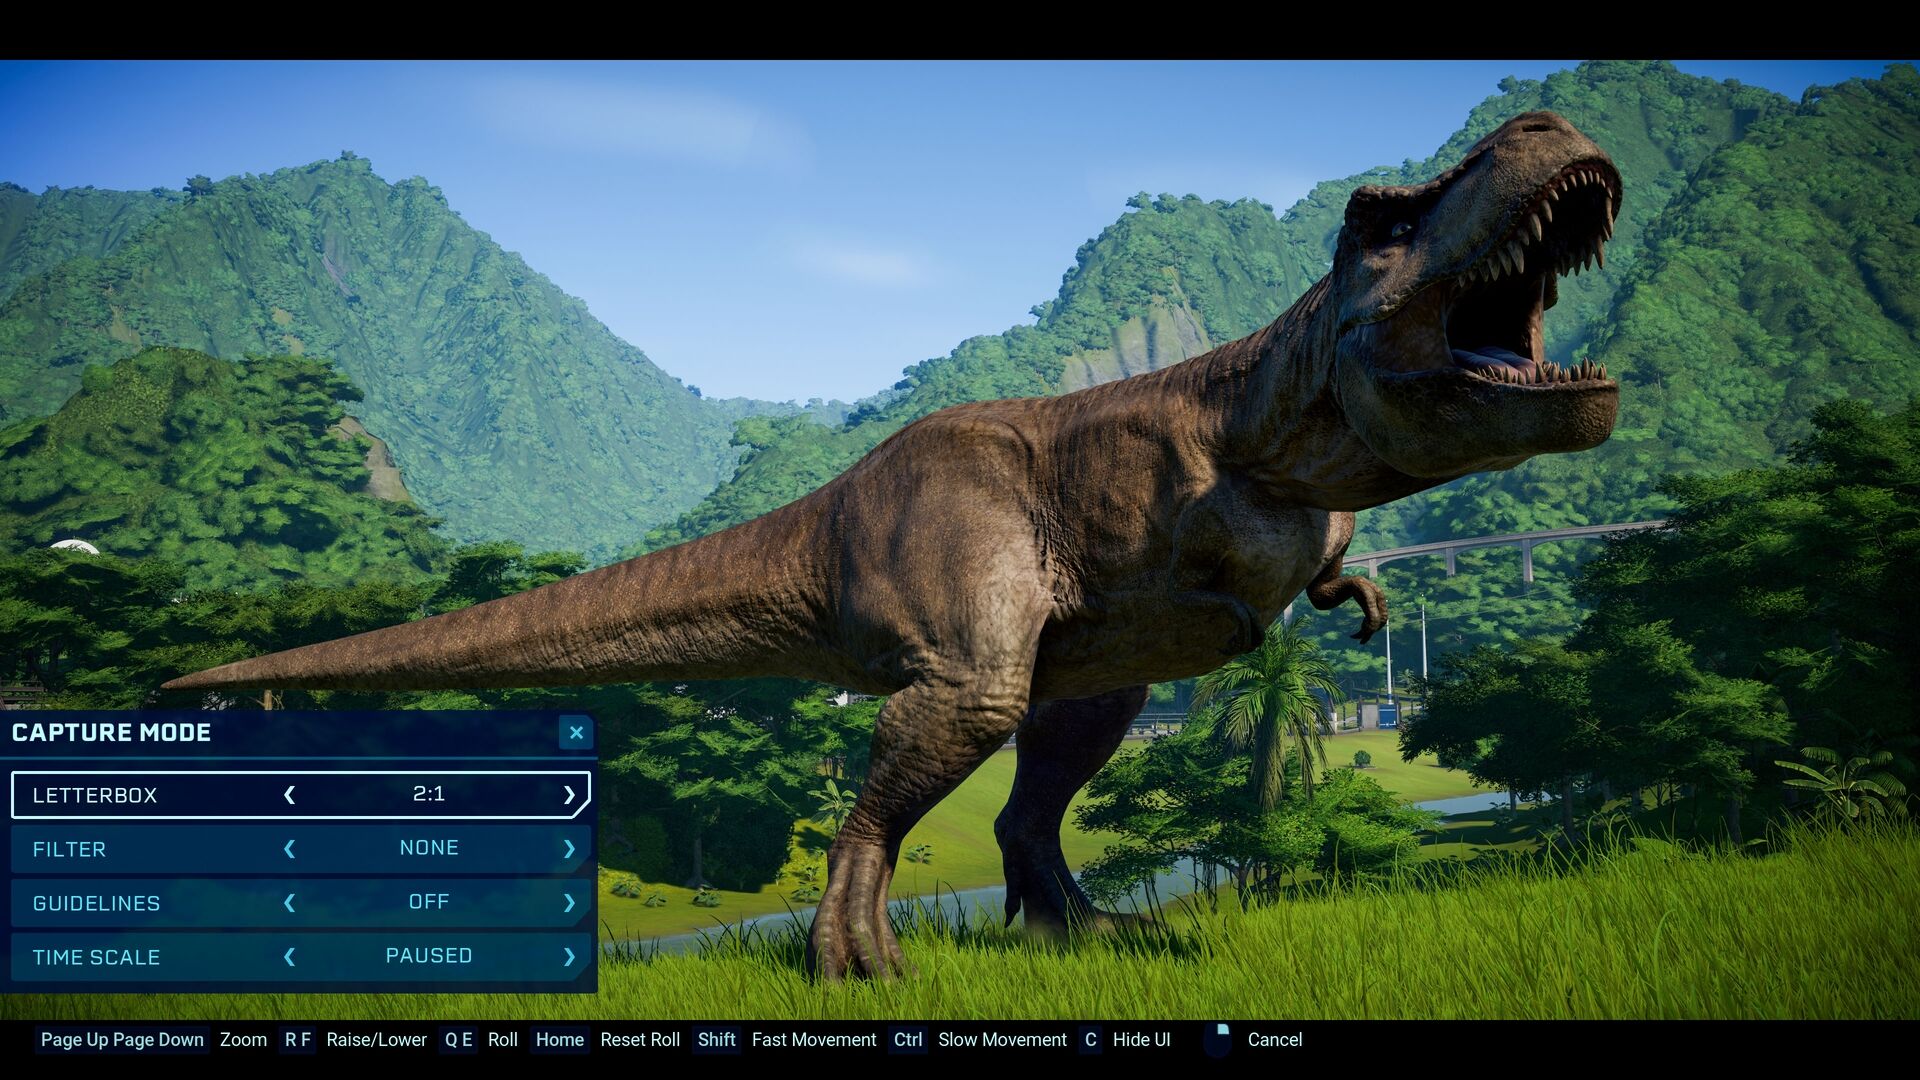 More Meat Eaters Arrive In Jurassic World Evolution With The Carnivore 